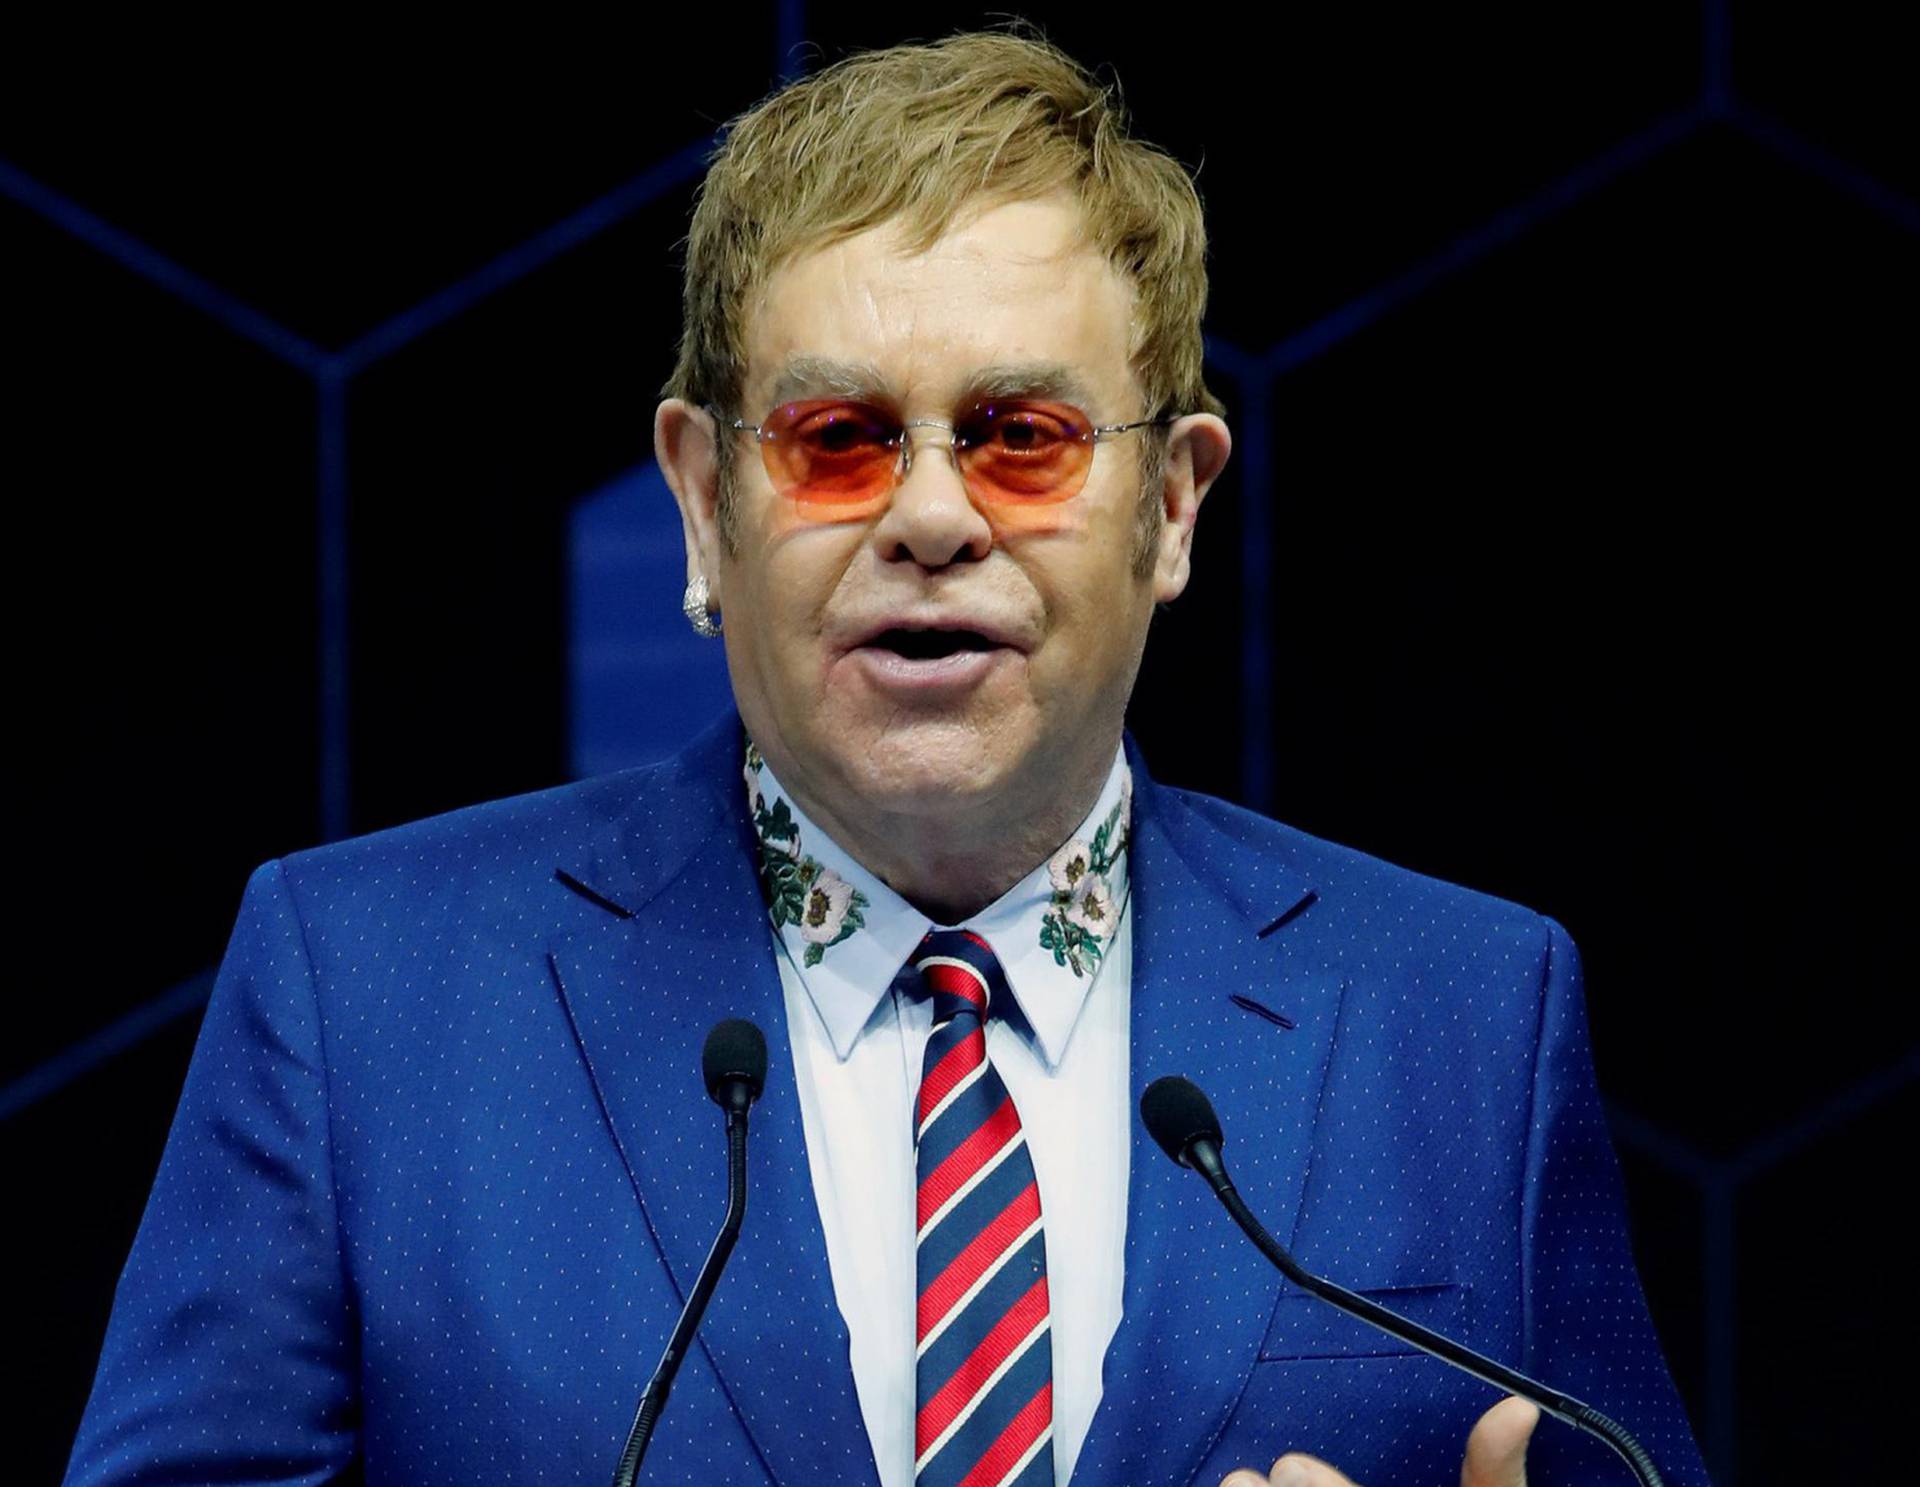 Singer Elton John speaks after receiving a Crystal Award from Hilde Schwab, Chairperson and Co-Founder, Schwab Foundation for Social Entrepreneurship, during the World Economic Forum (WEF) annual meeting in Davos